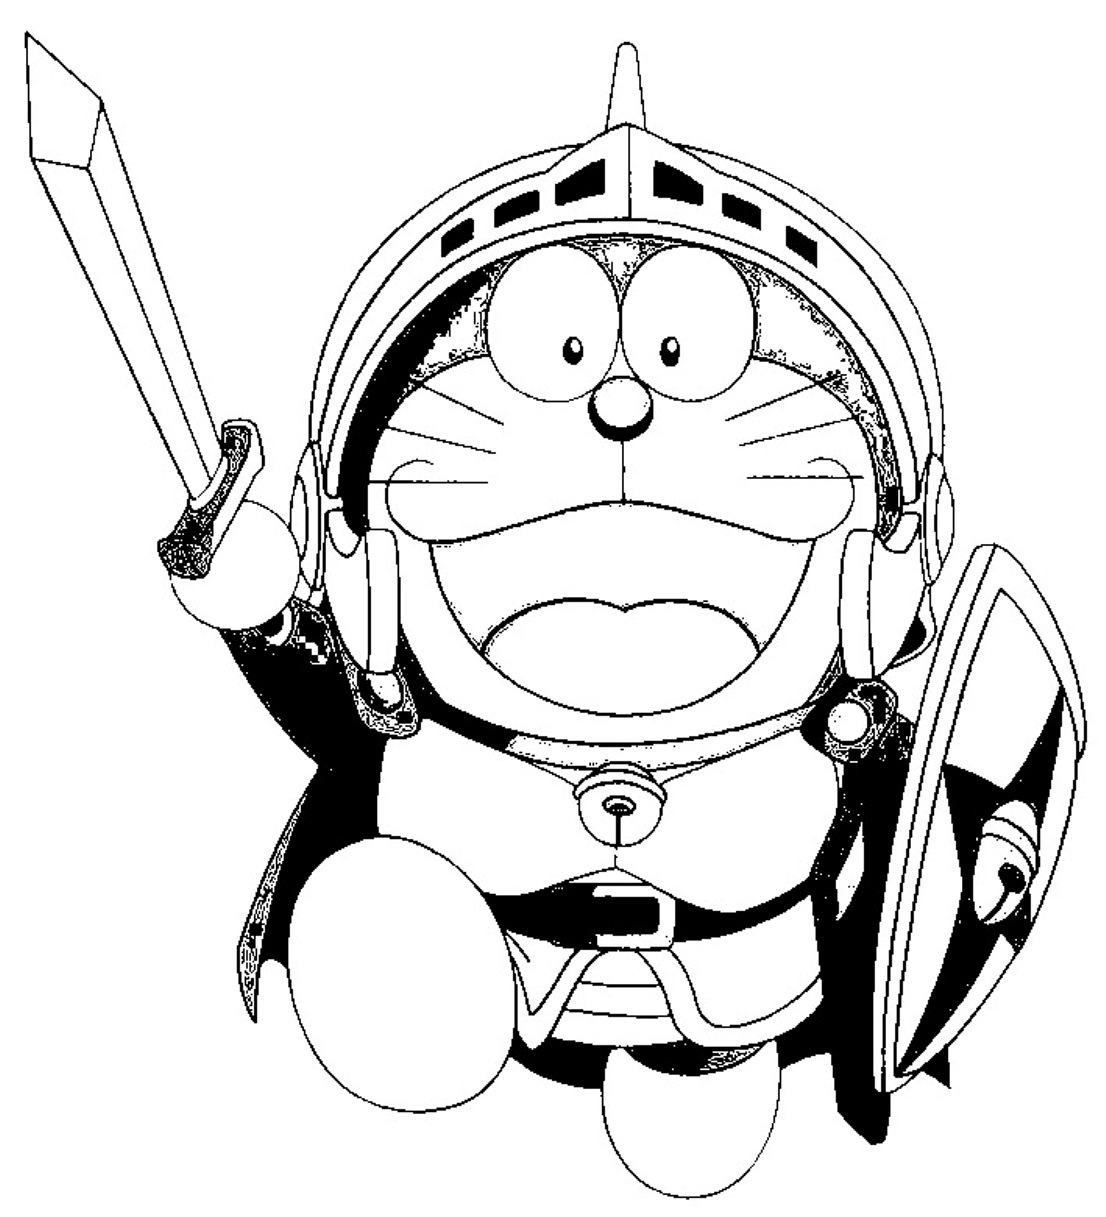 Doraemon The Warrior Coloring Page - Free Printable Coloring Pages for Kids